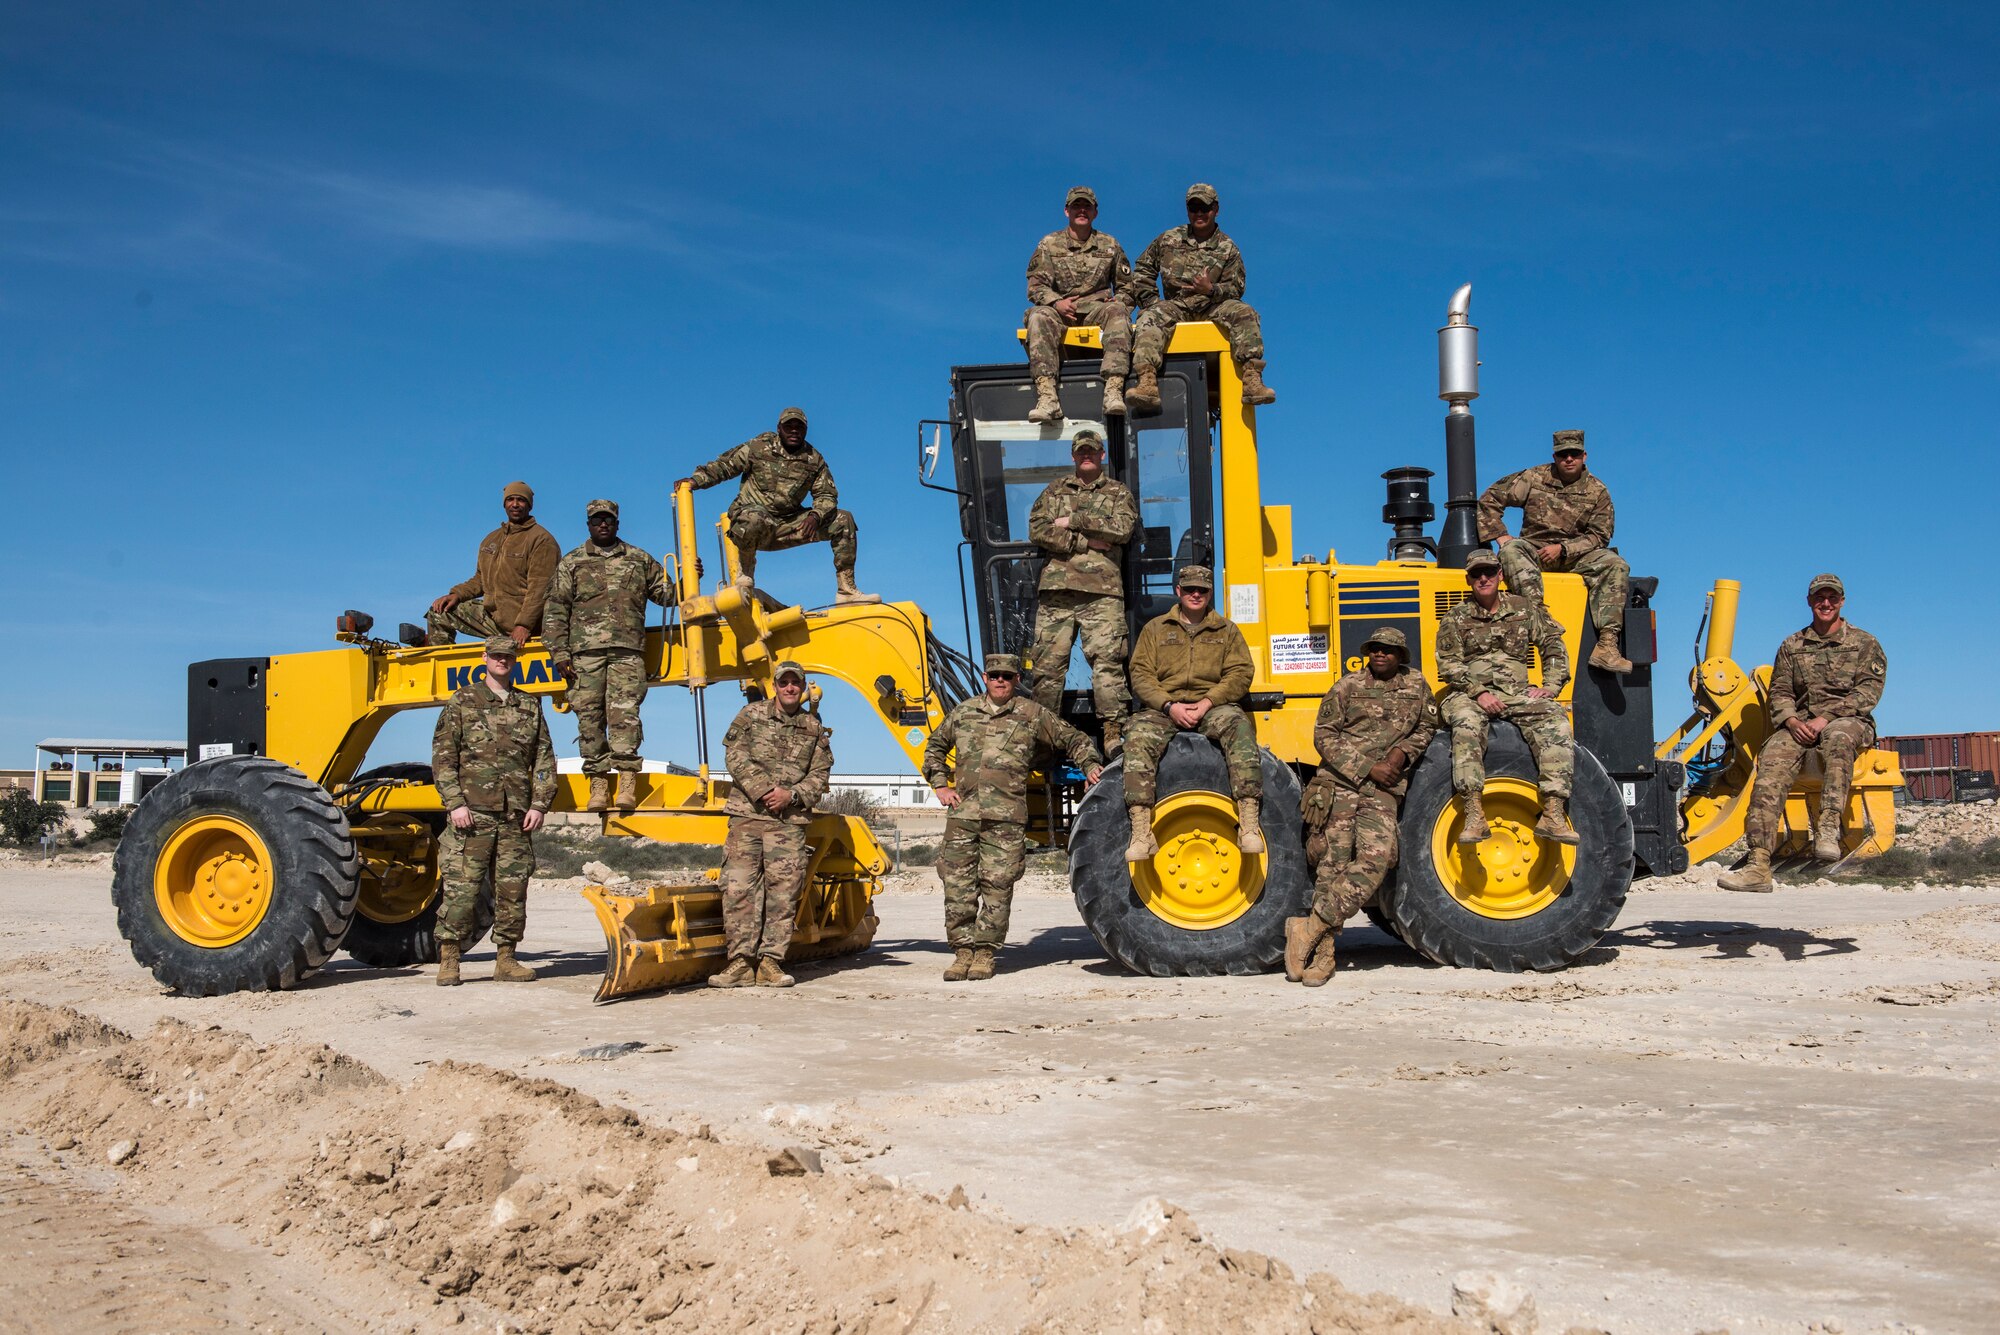 Airmen from the 386th Expeditionary Civil Engineer Squadron pose for a photo at an undisclosed location in Southwest Asia, Jan. 10, 2019. Airmen from this rotation have continued the work from the last rotation and have connected the road to its endpoint.